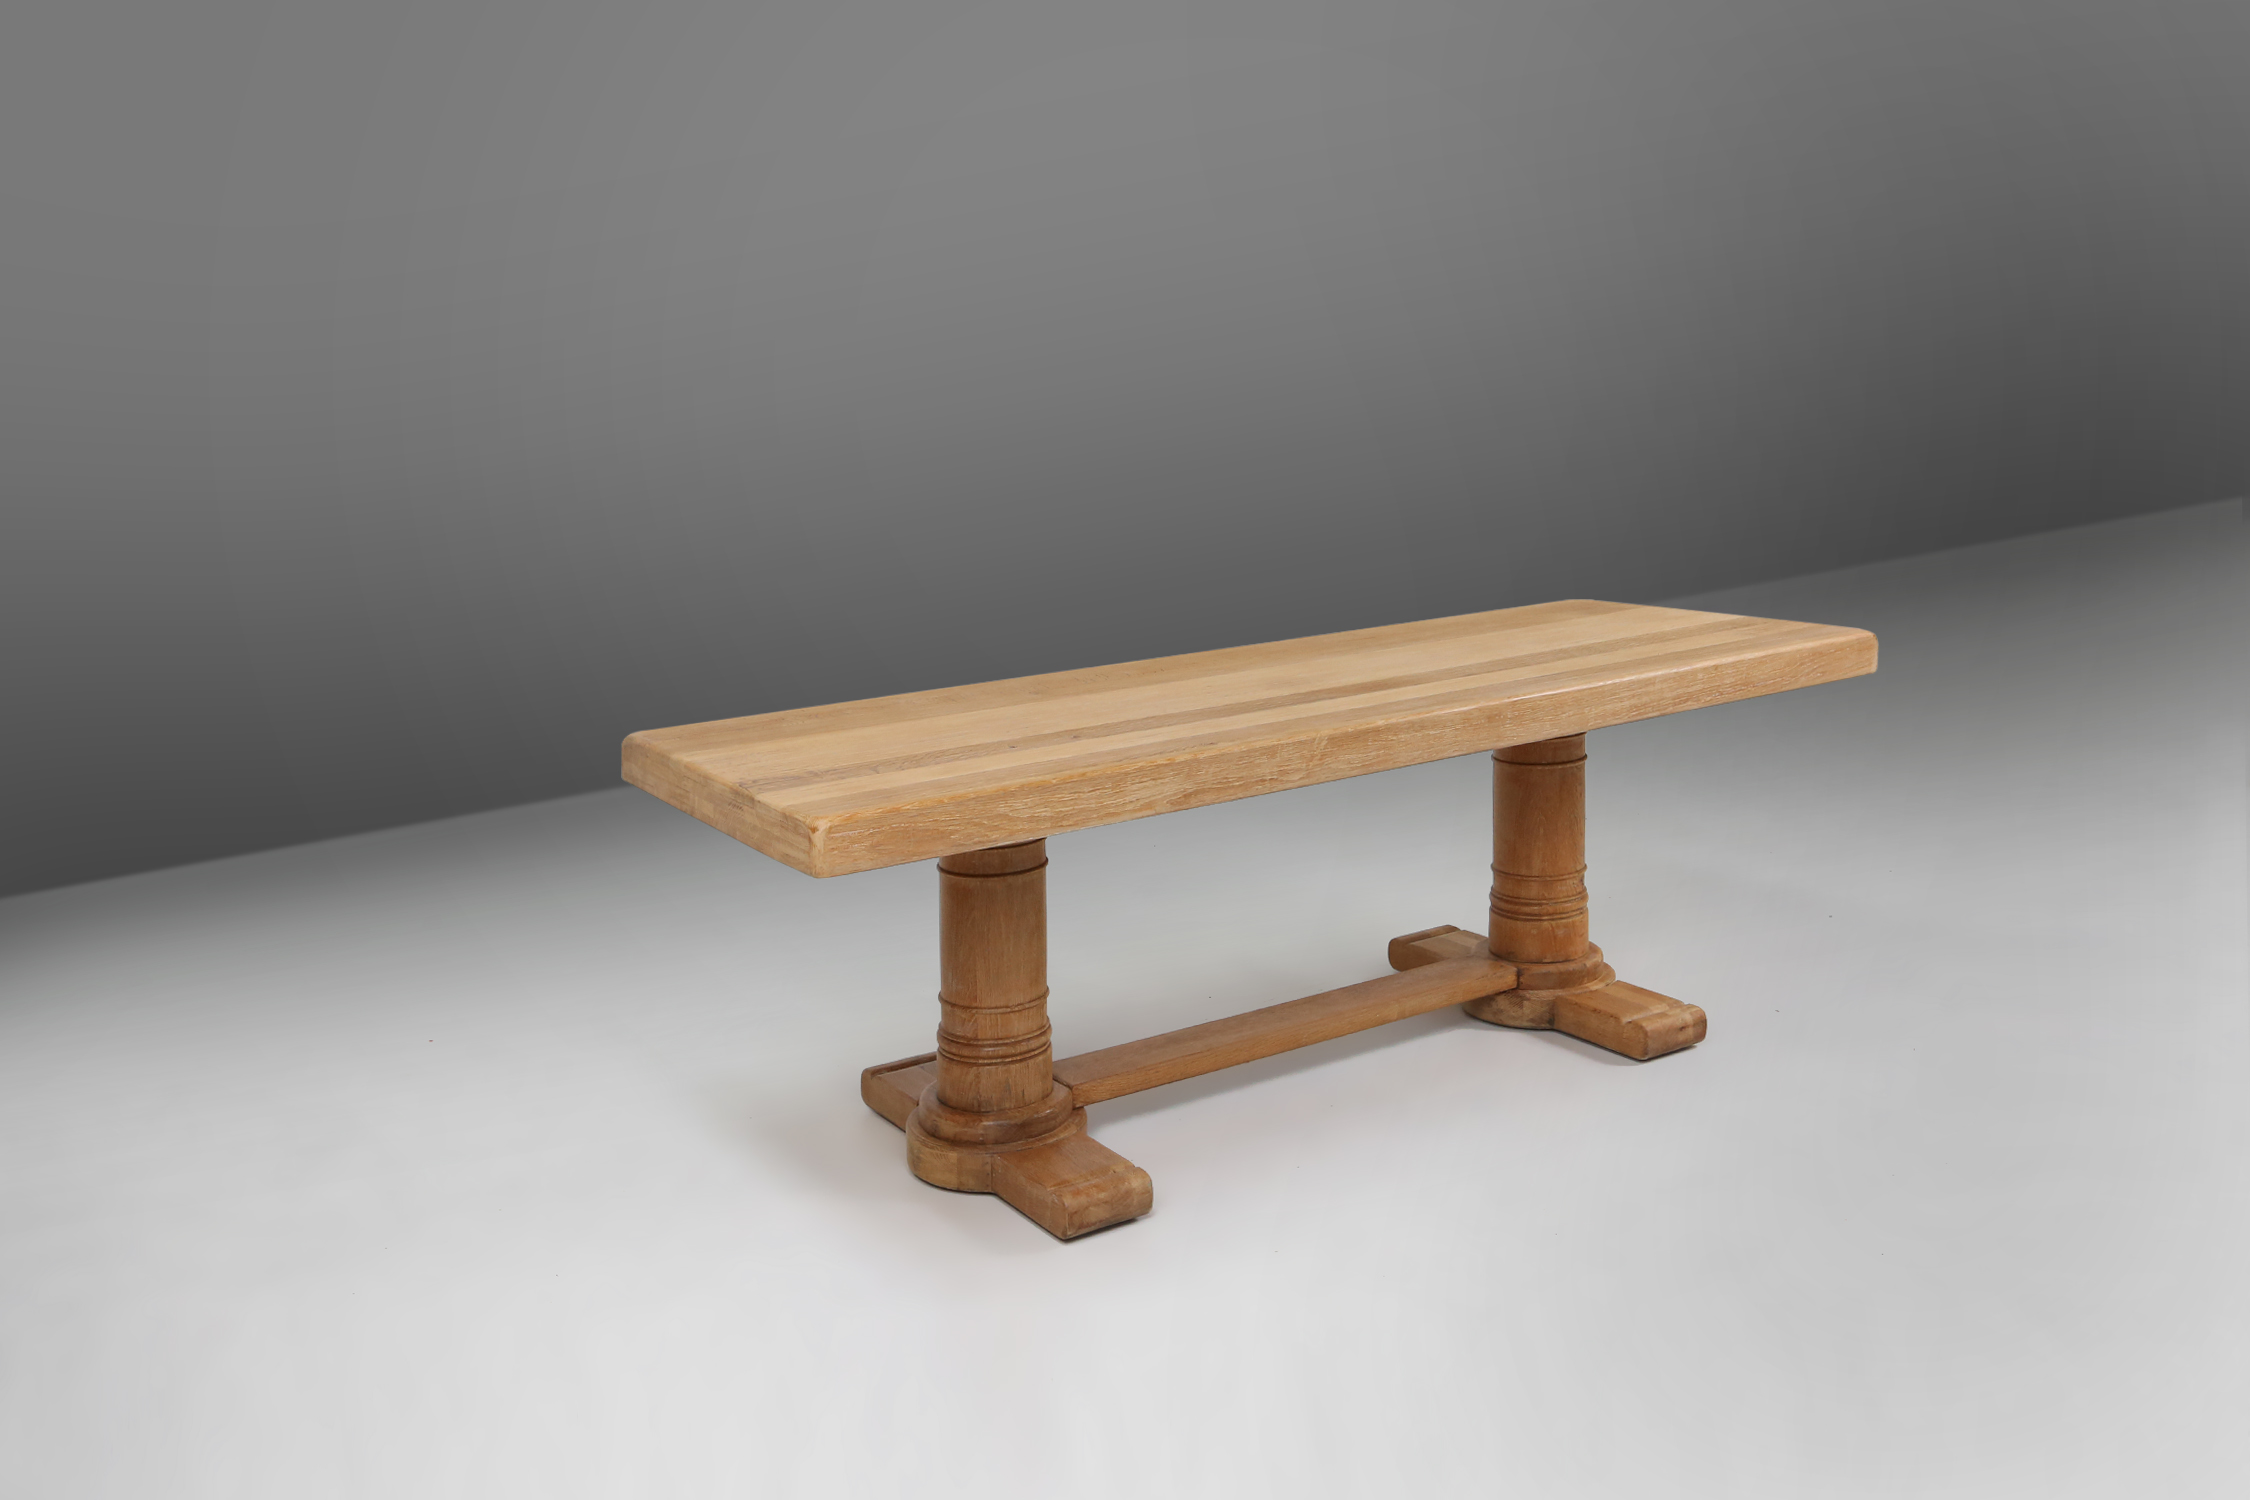 Rustic mid-century French dining table in oak from the 1950sthumbnail